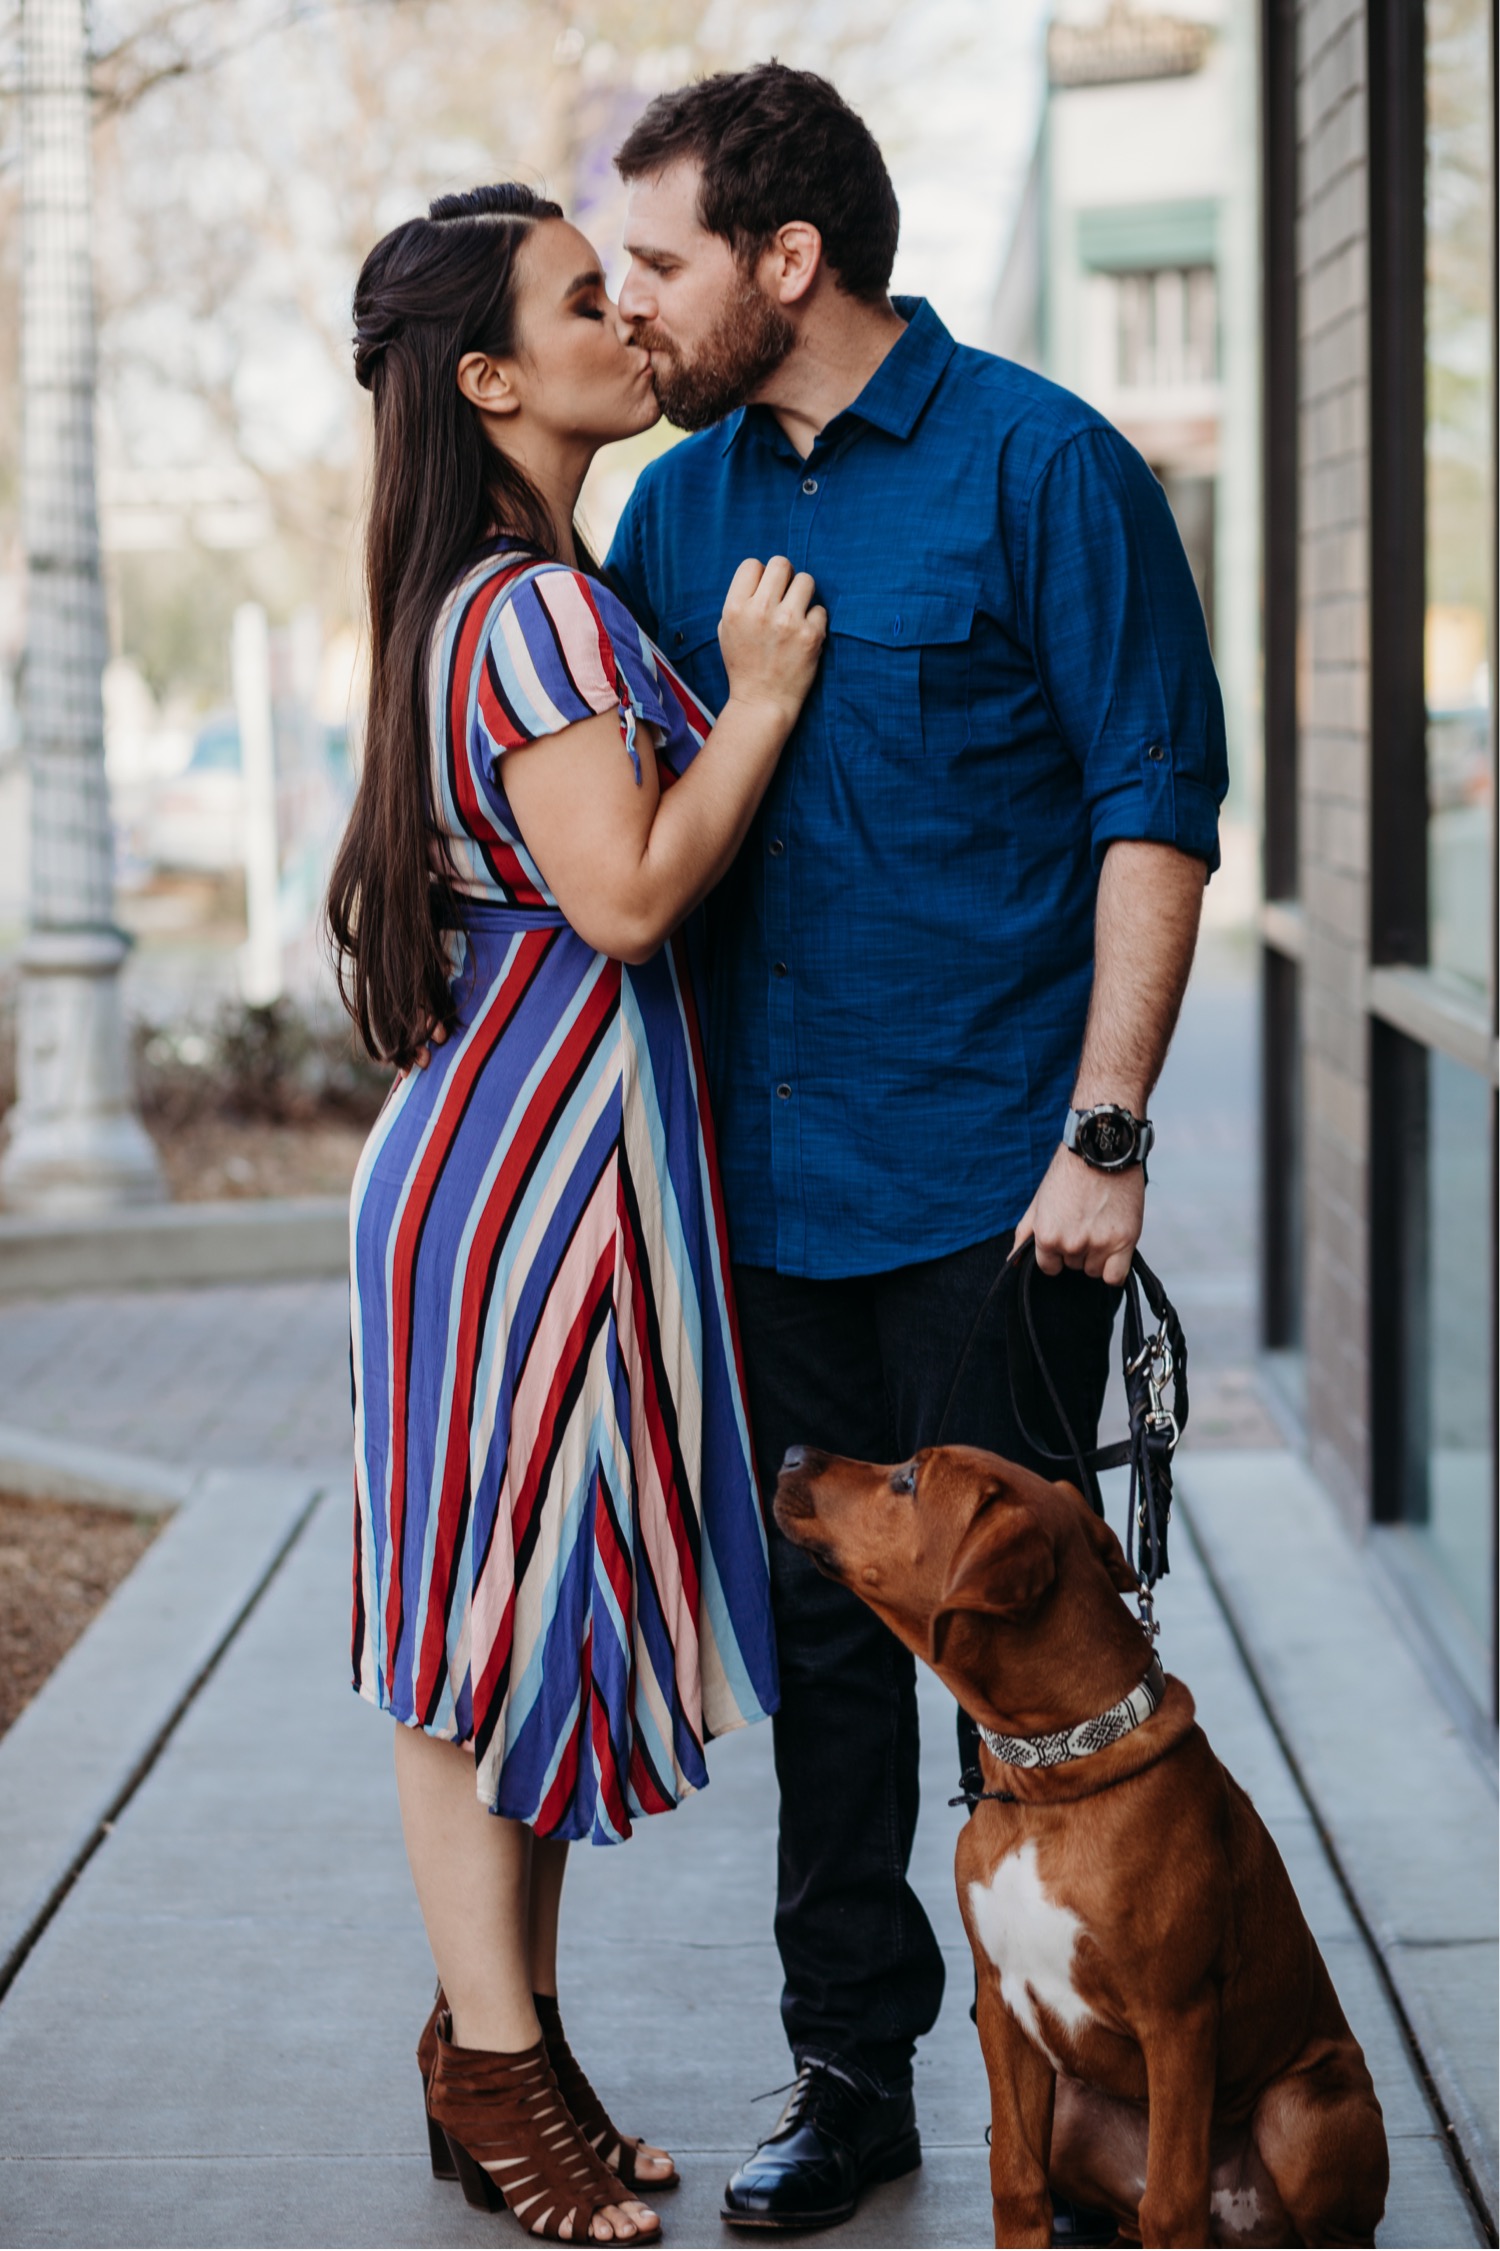 Couple kisses while their cute brown dog looks up at them during their Downtown Davis engagement photoshoot.